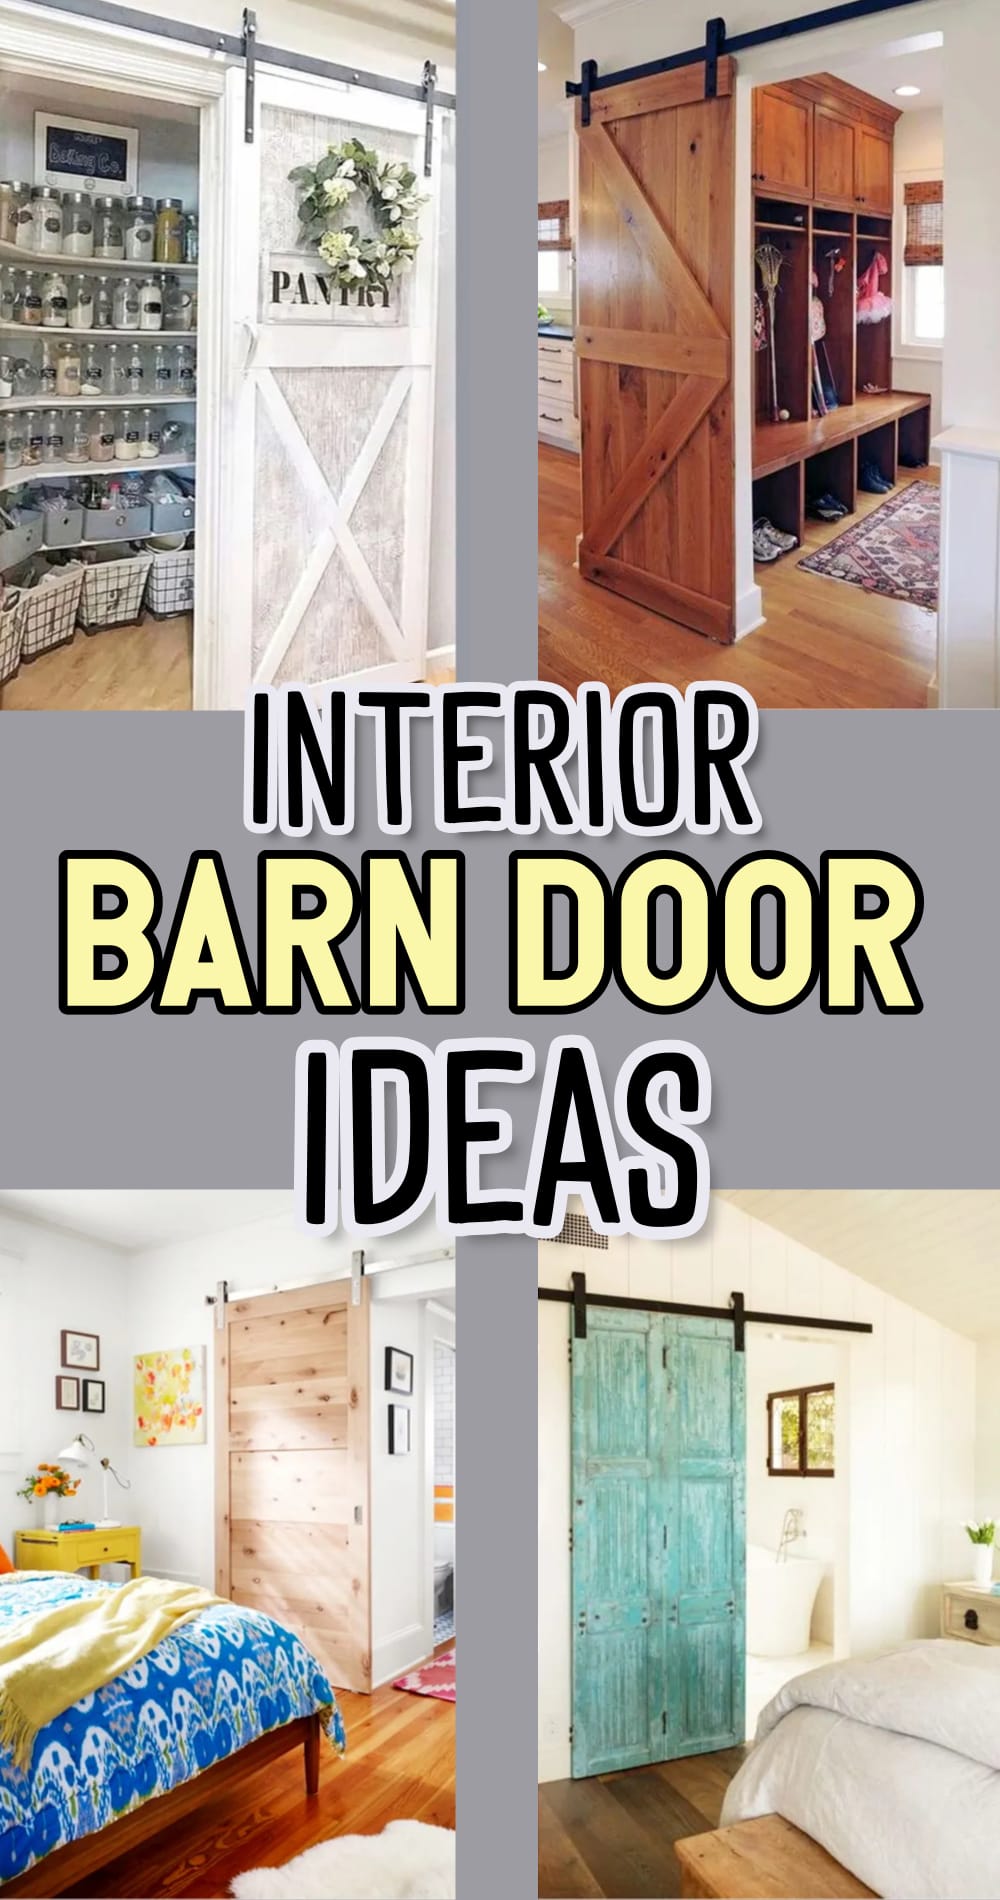 Barn Door Ideas Pictures - Interior Sliding Pantry Barn Door in Farmhouse Style, Mudroom Barn Door, Bedroom Sliding Barn-Style Door and Bathroom Barn Door For Privacy in Blue Teal Paint Color